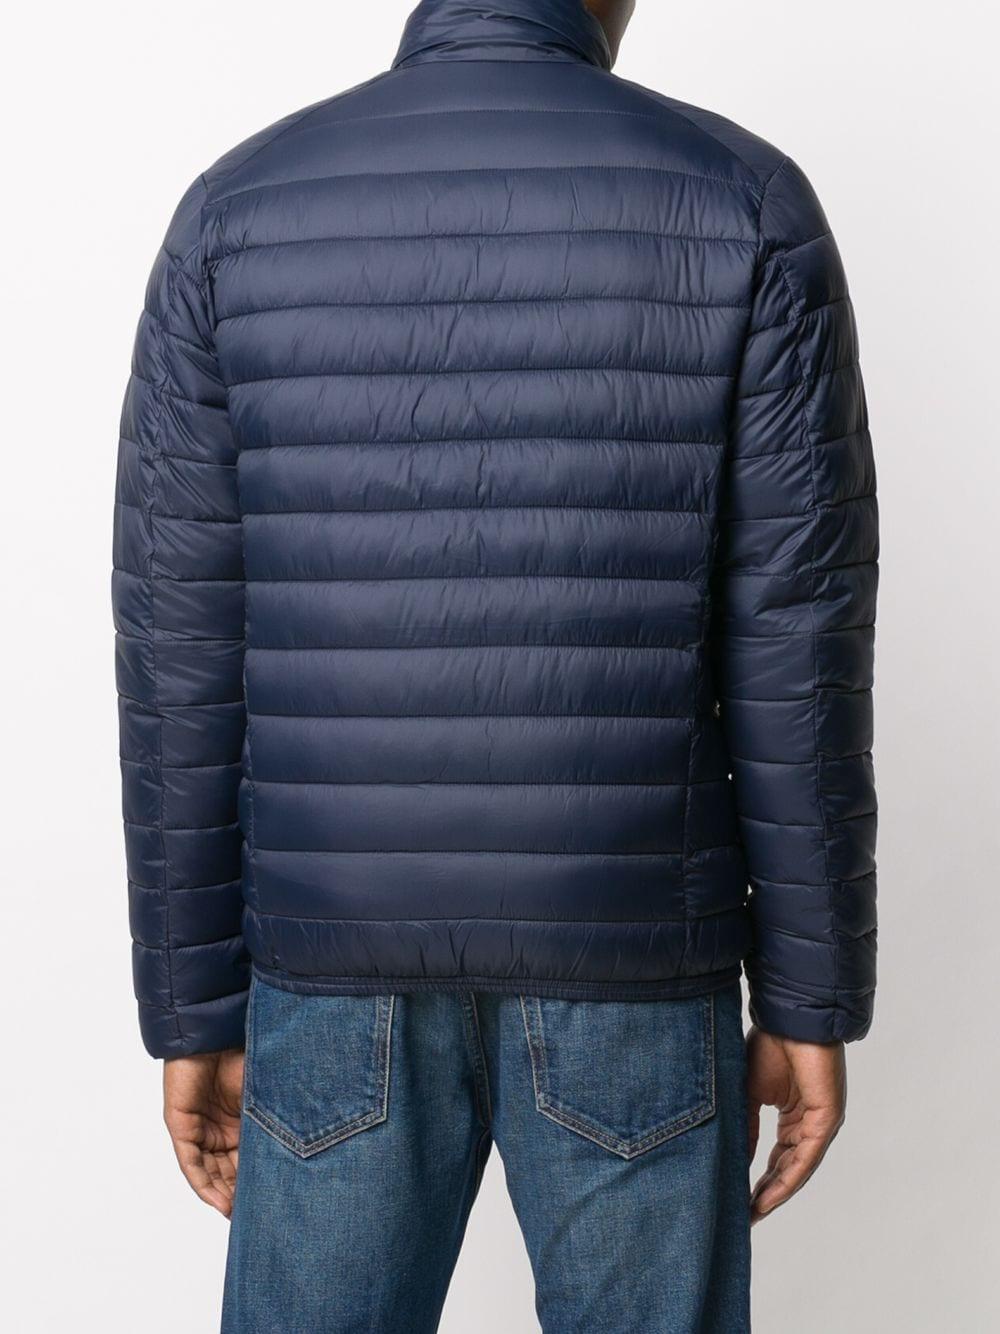 Save The Duck Synthetic Two-way Zip Puffer Jacket in Blue for Men - Lyst